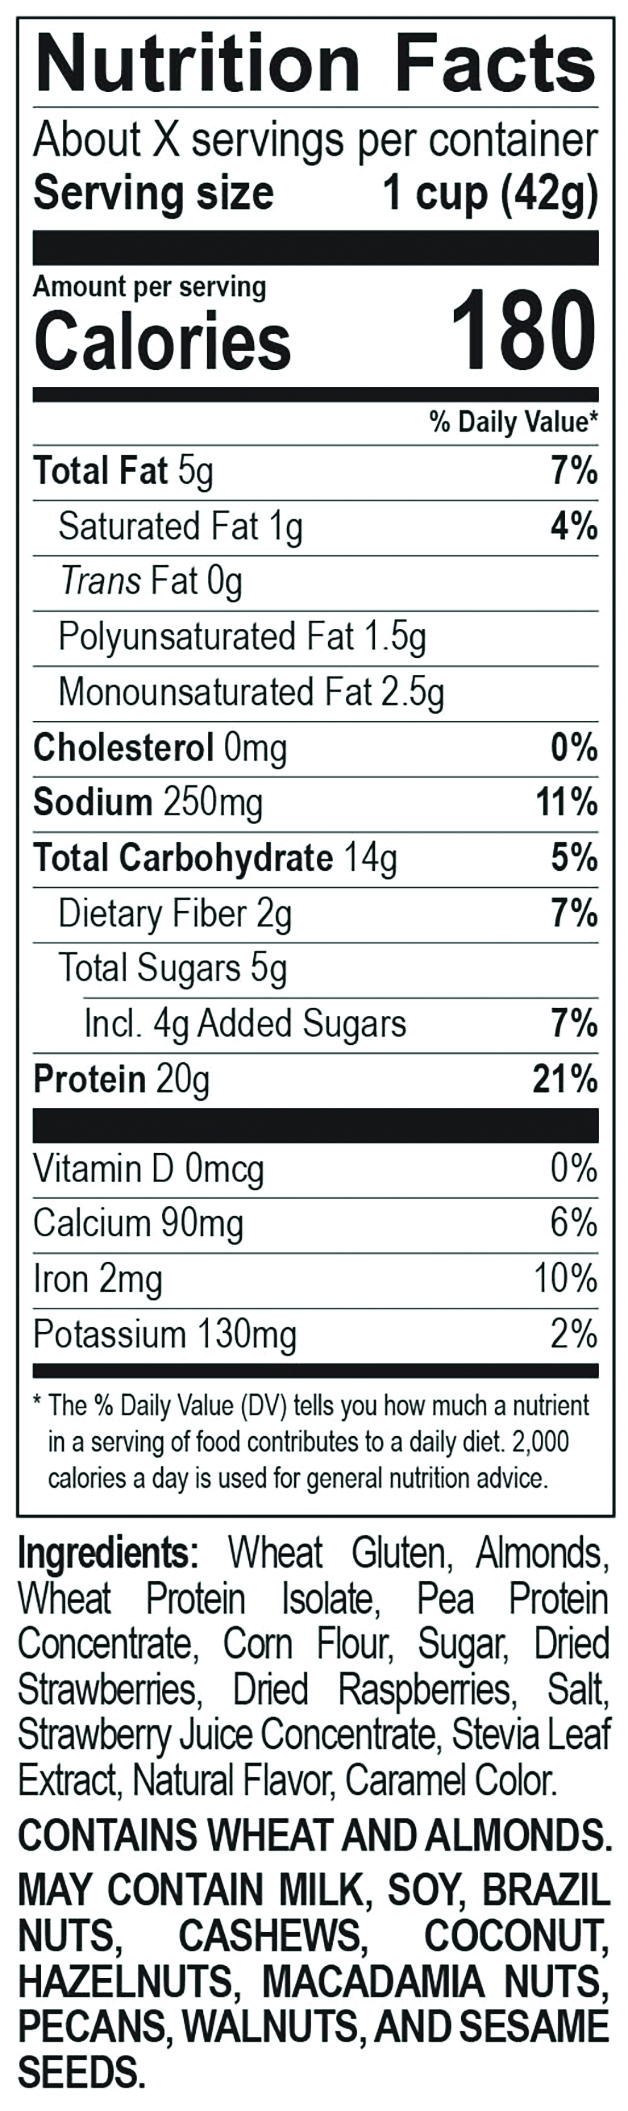 Premier Protein Mixed Berry Cereal Nutrition Facts Label